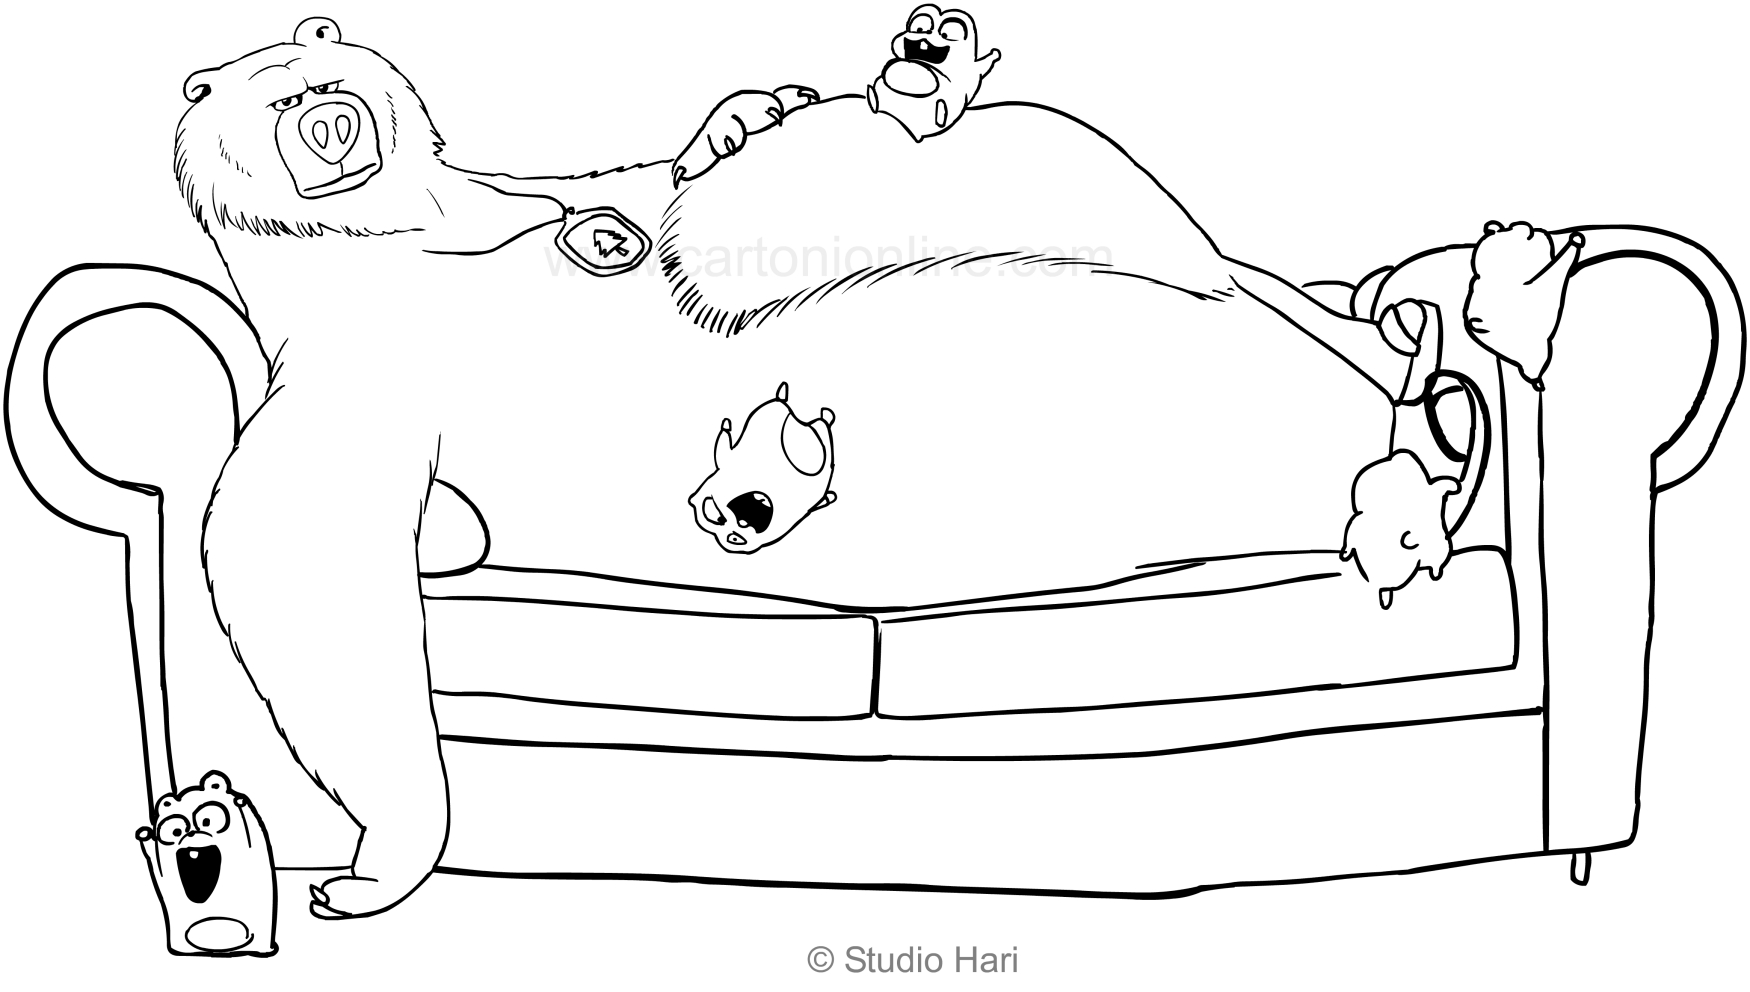 Grizzy and the Lemming on the sofa coloring page to print